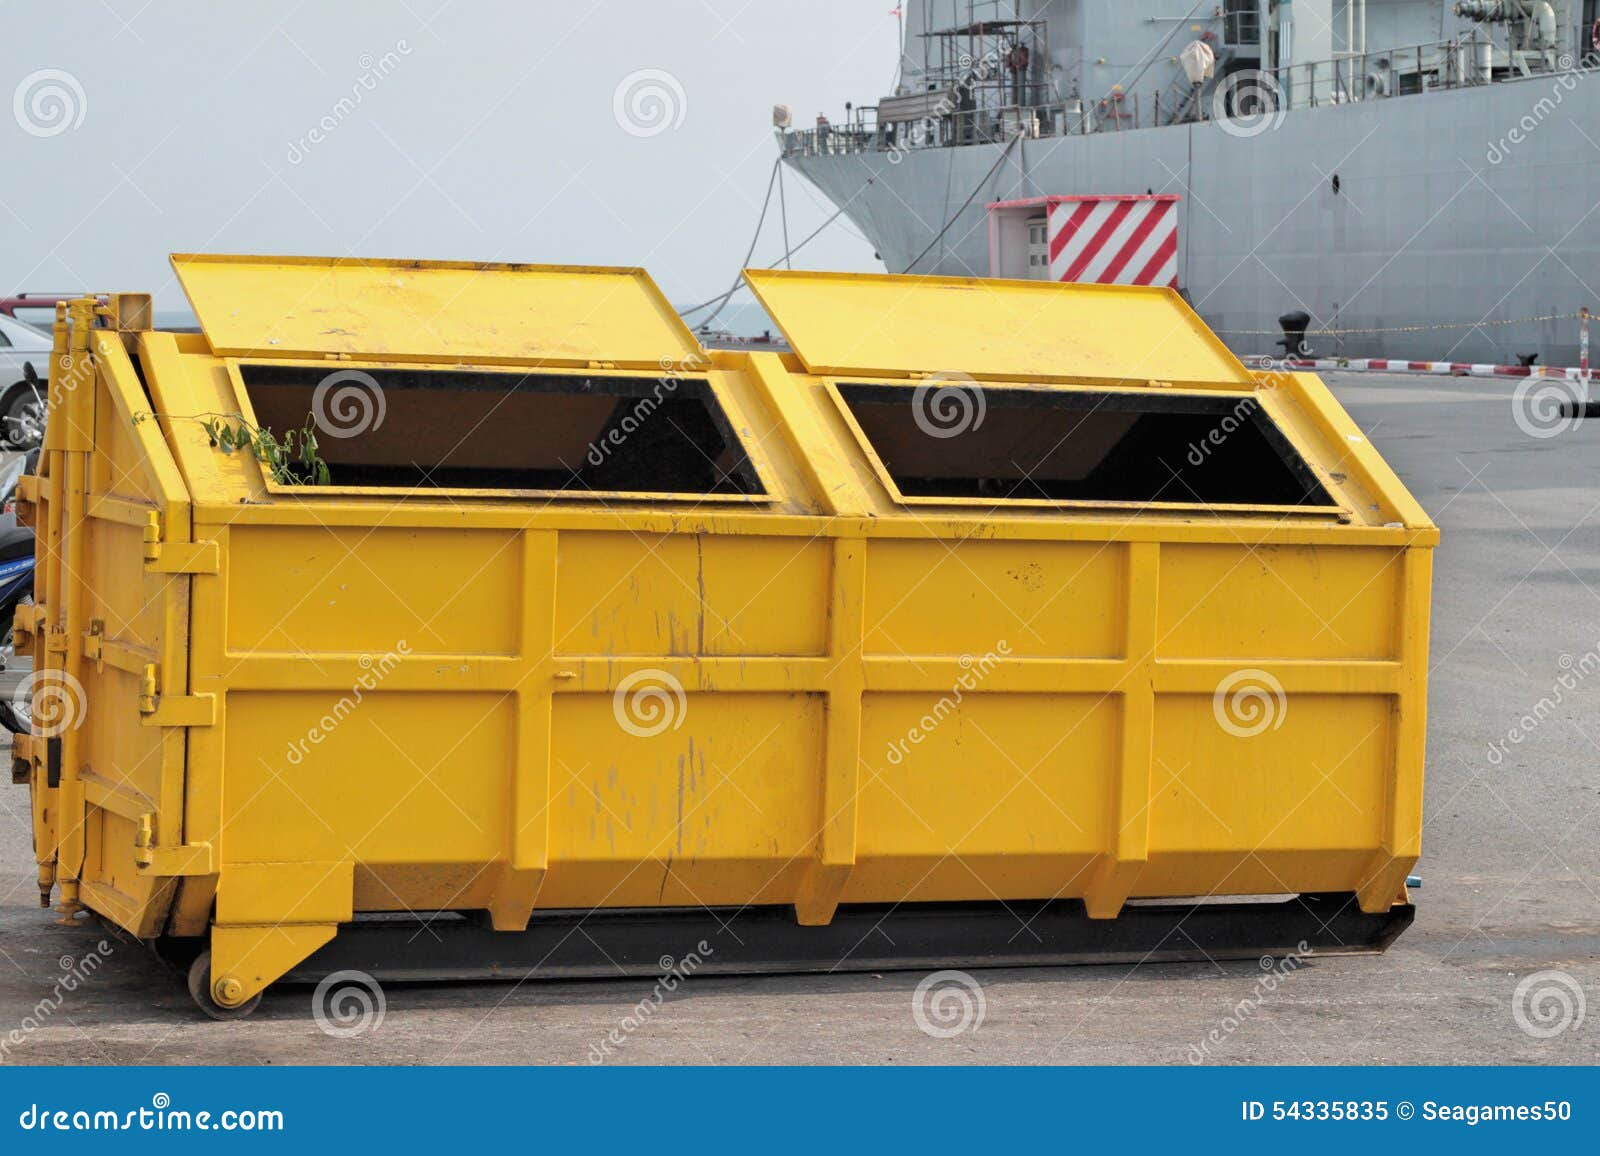 Trash Can Dustbins Big Yellow Outside. Stock Image - Image of street,  trashcan: 54335835